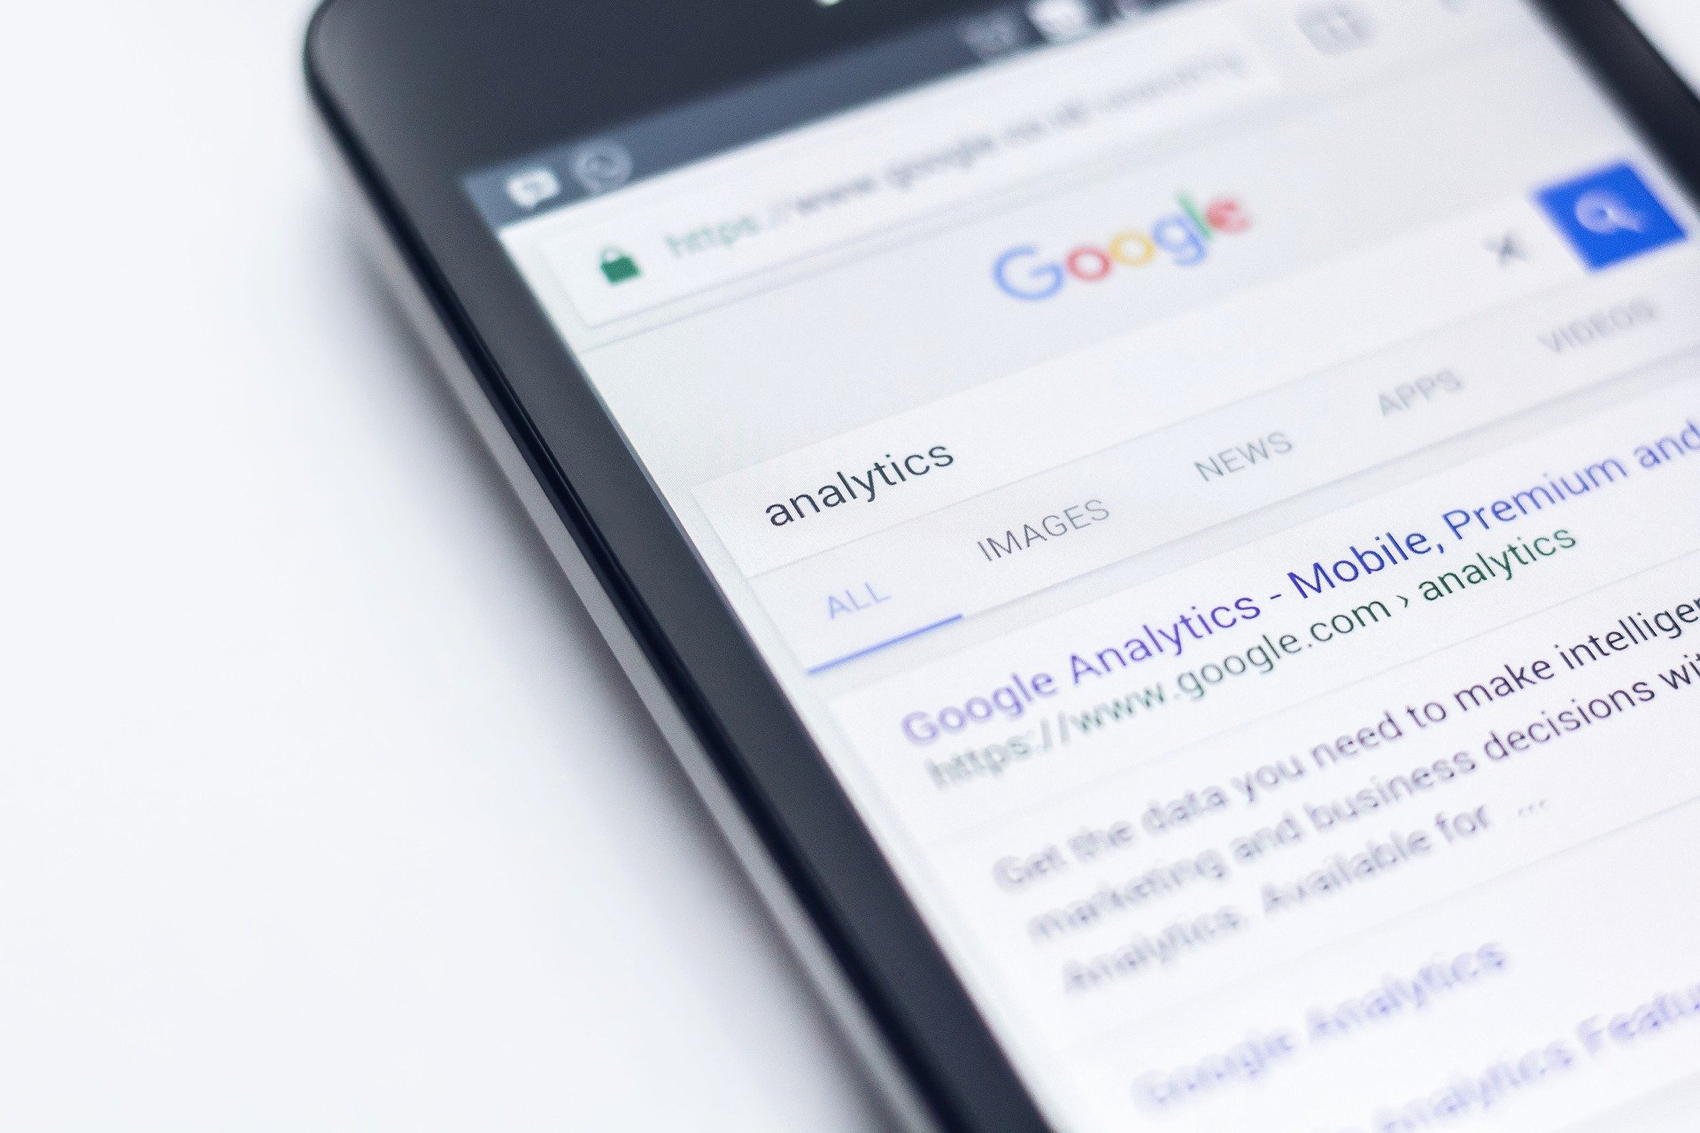 Google Search on Android - Image by Pexels